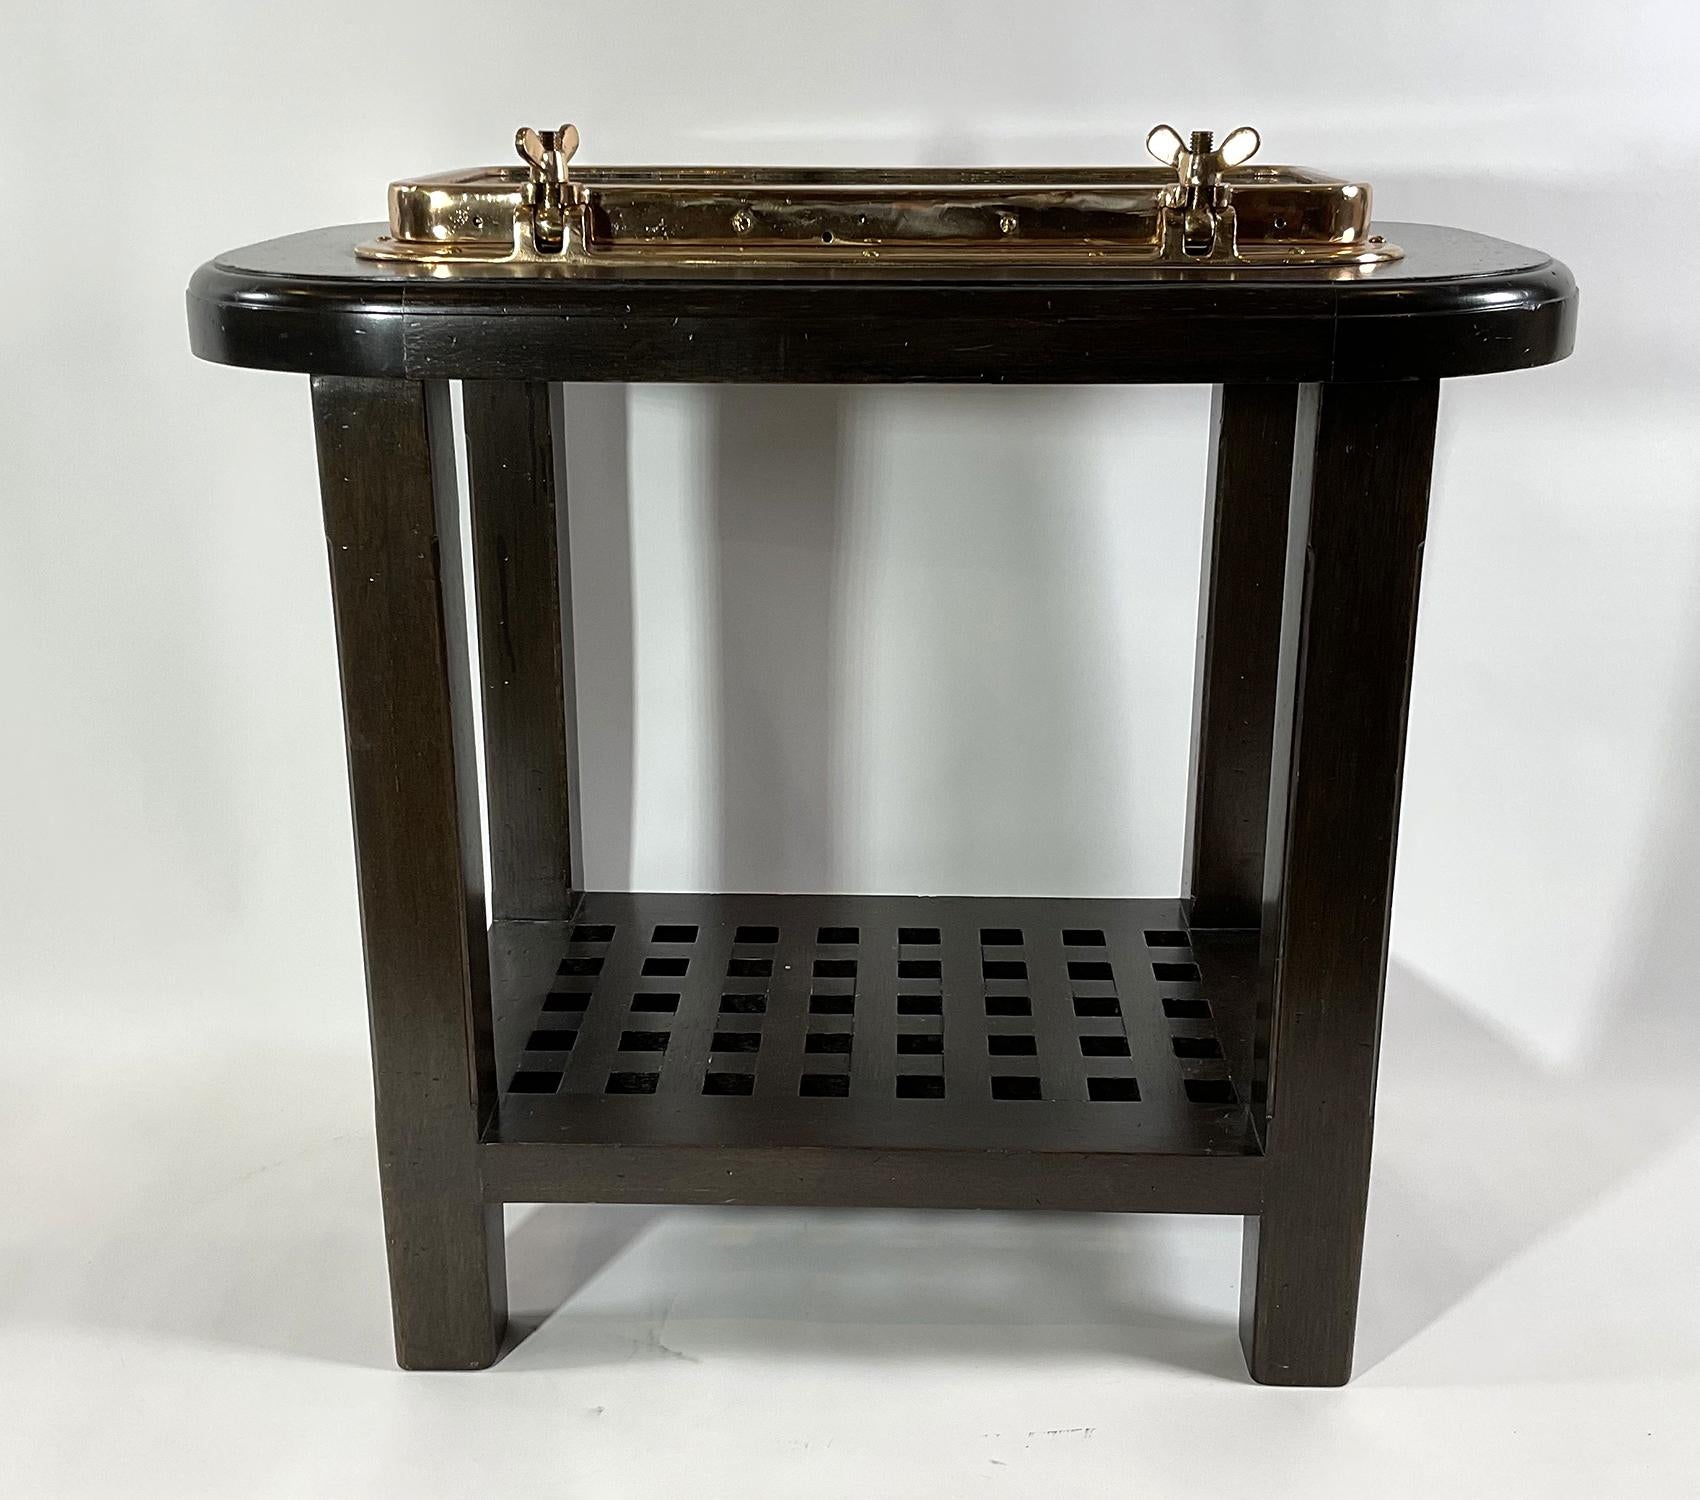 Solid brass nautical porthole table. A yacht porthole with hinged door and dog bolts has been fitted to a custom mahogany table with lower shelf in the form of a ships grating. The rectangular porthole has been polished and lacquered. Porthole is